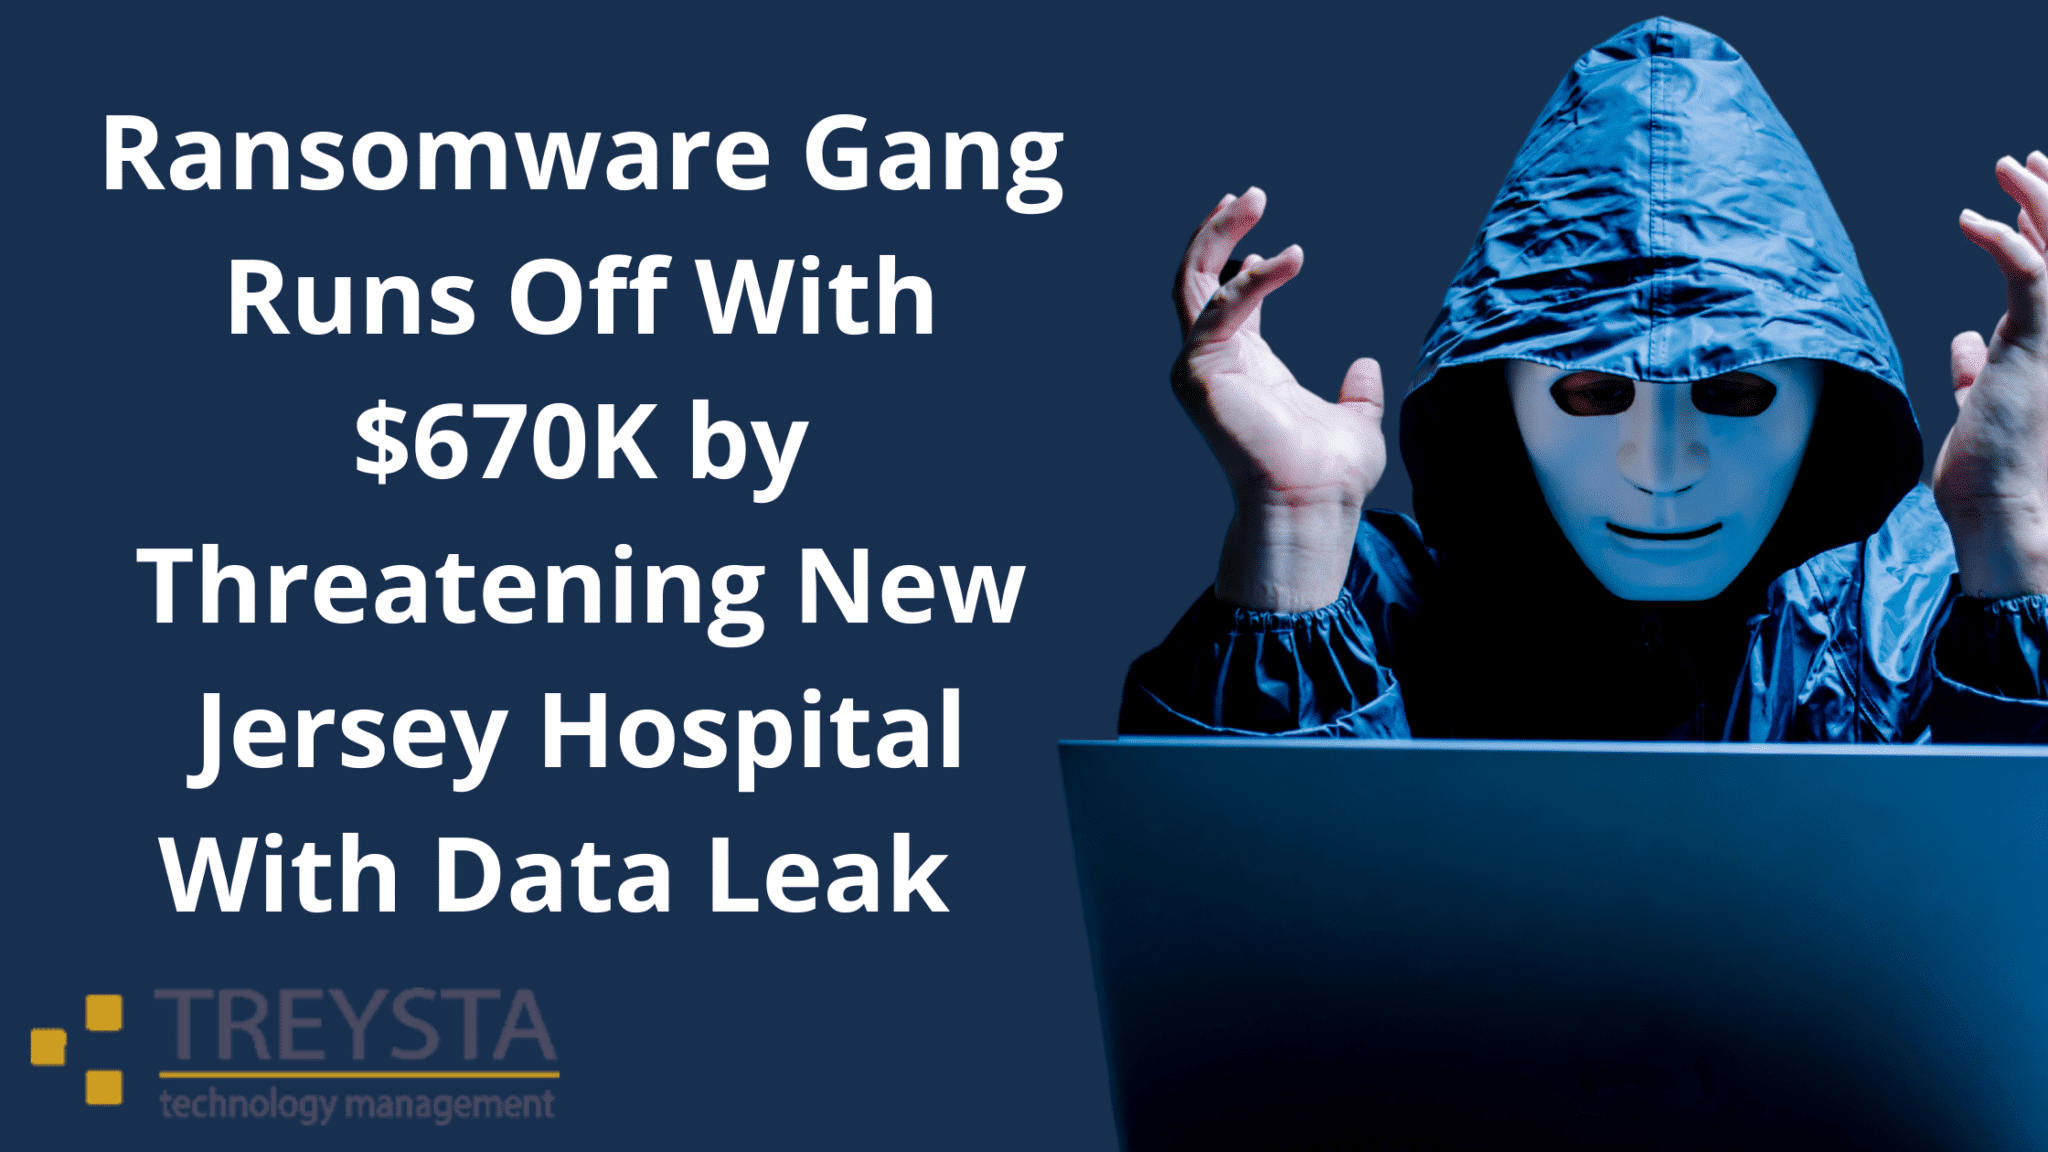 Ransomware Gang Runs Off With $670K by Threatening New Jersey Hospital With Data Leak